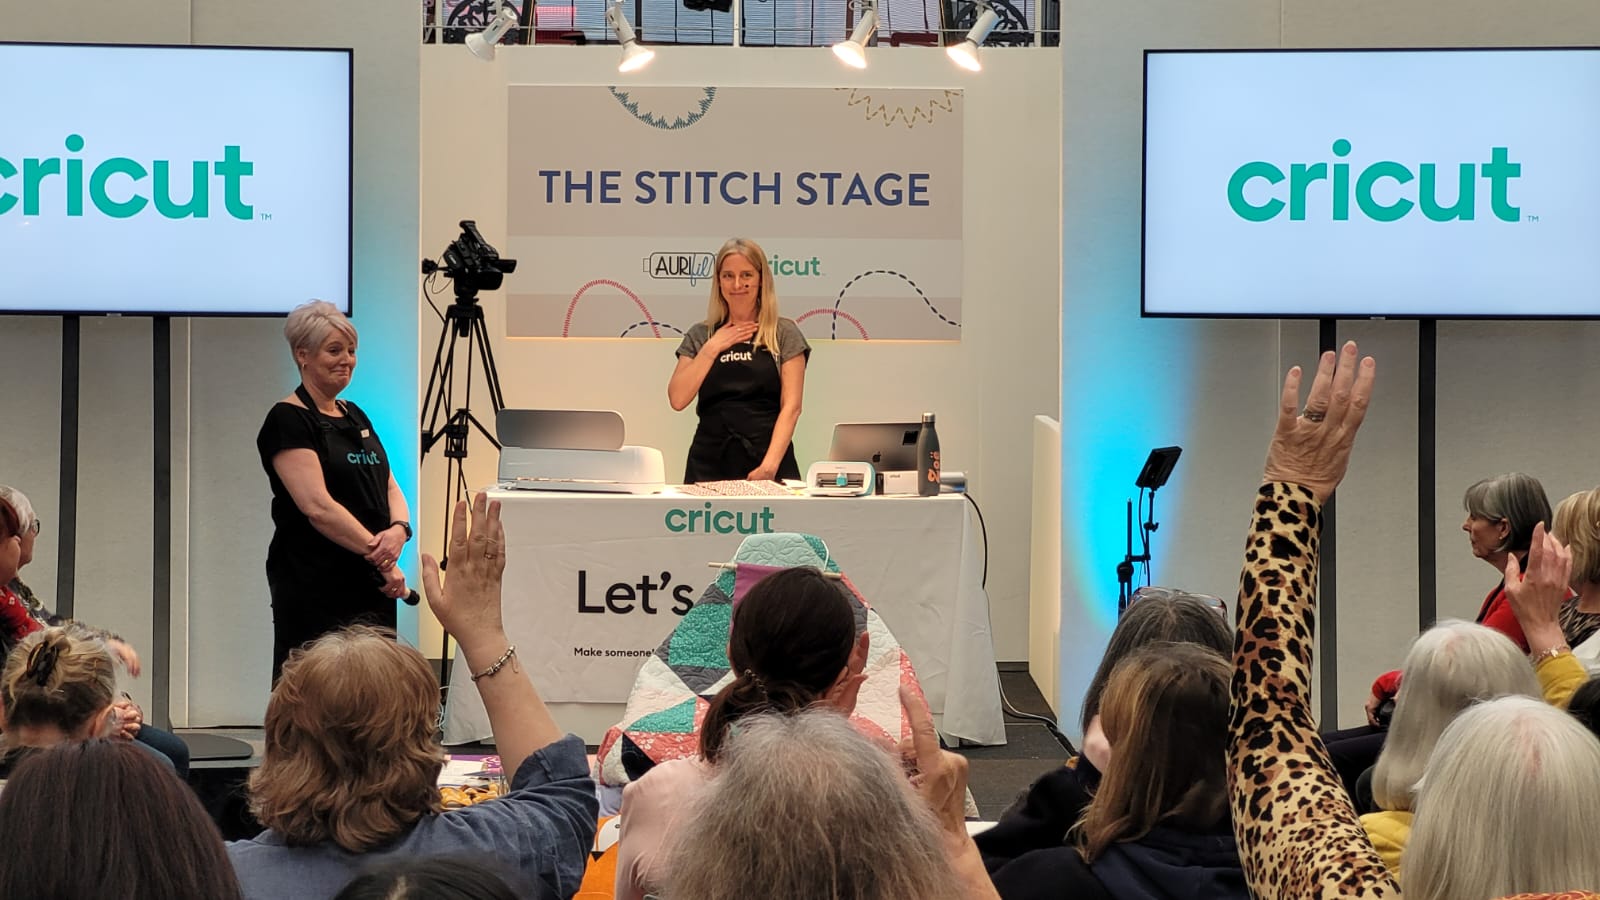 Cricut demos confirmed for the Knitting and Stitching Shows